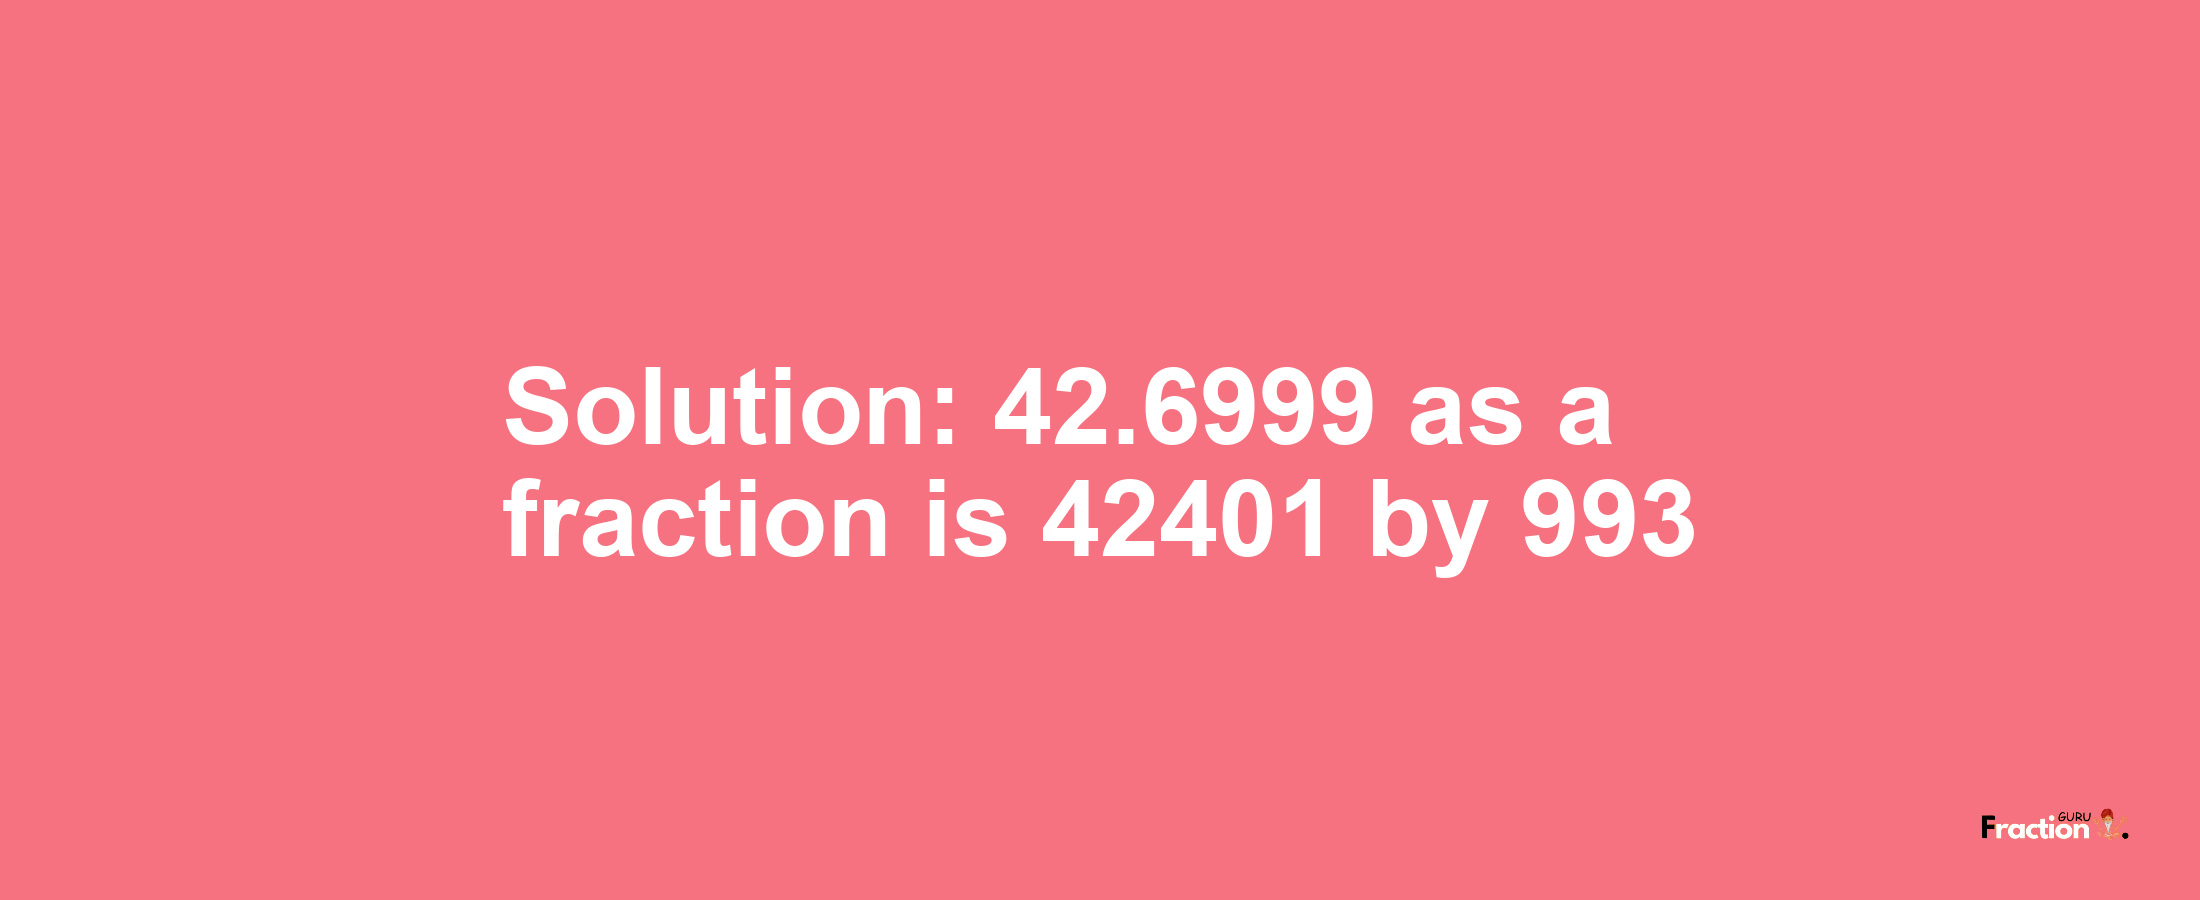 Solution:42.6999 as a fraction is 42401/993